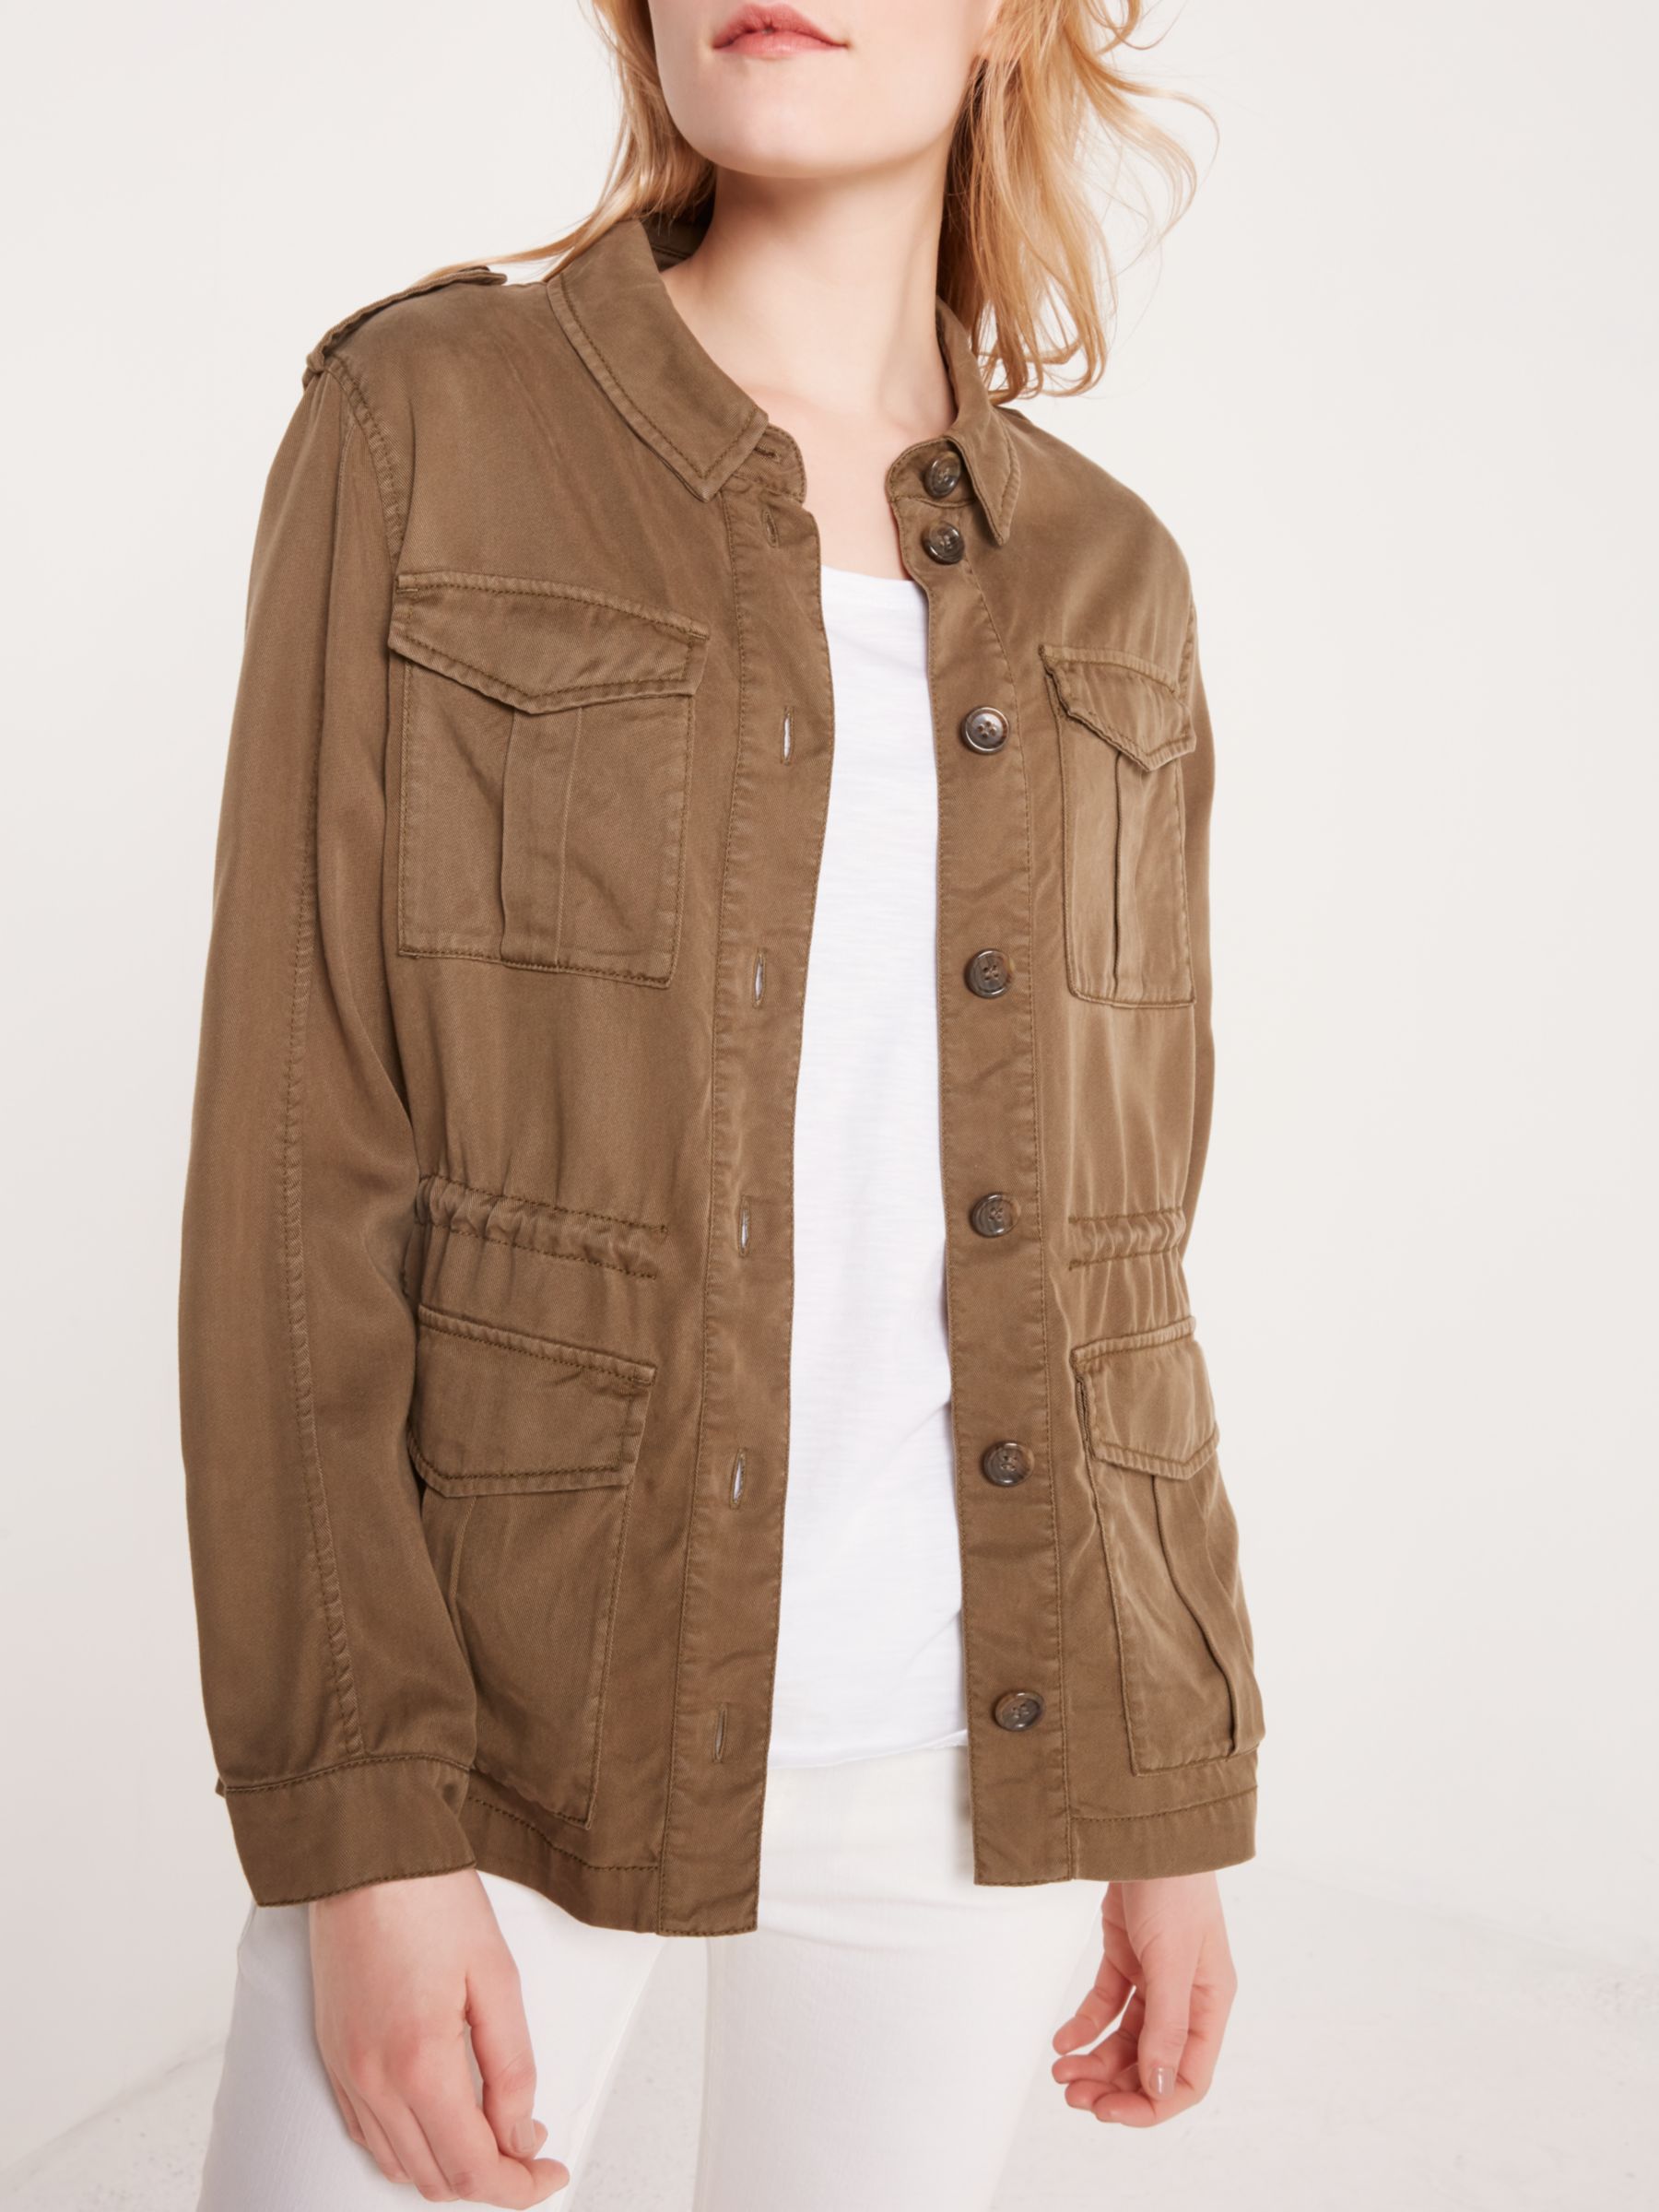 AND/OR Utility Jacket